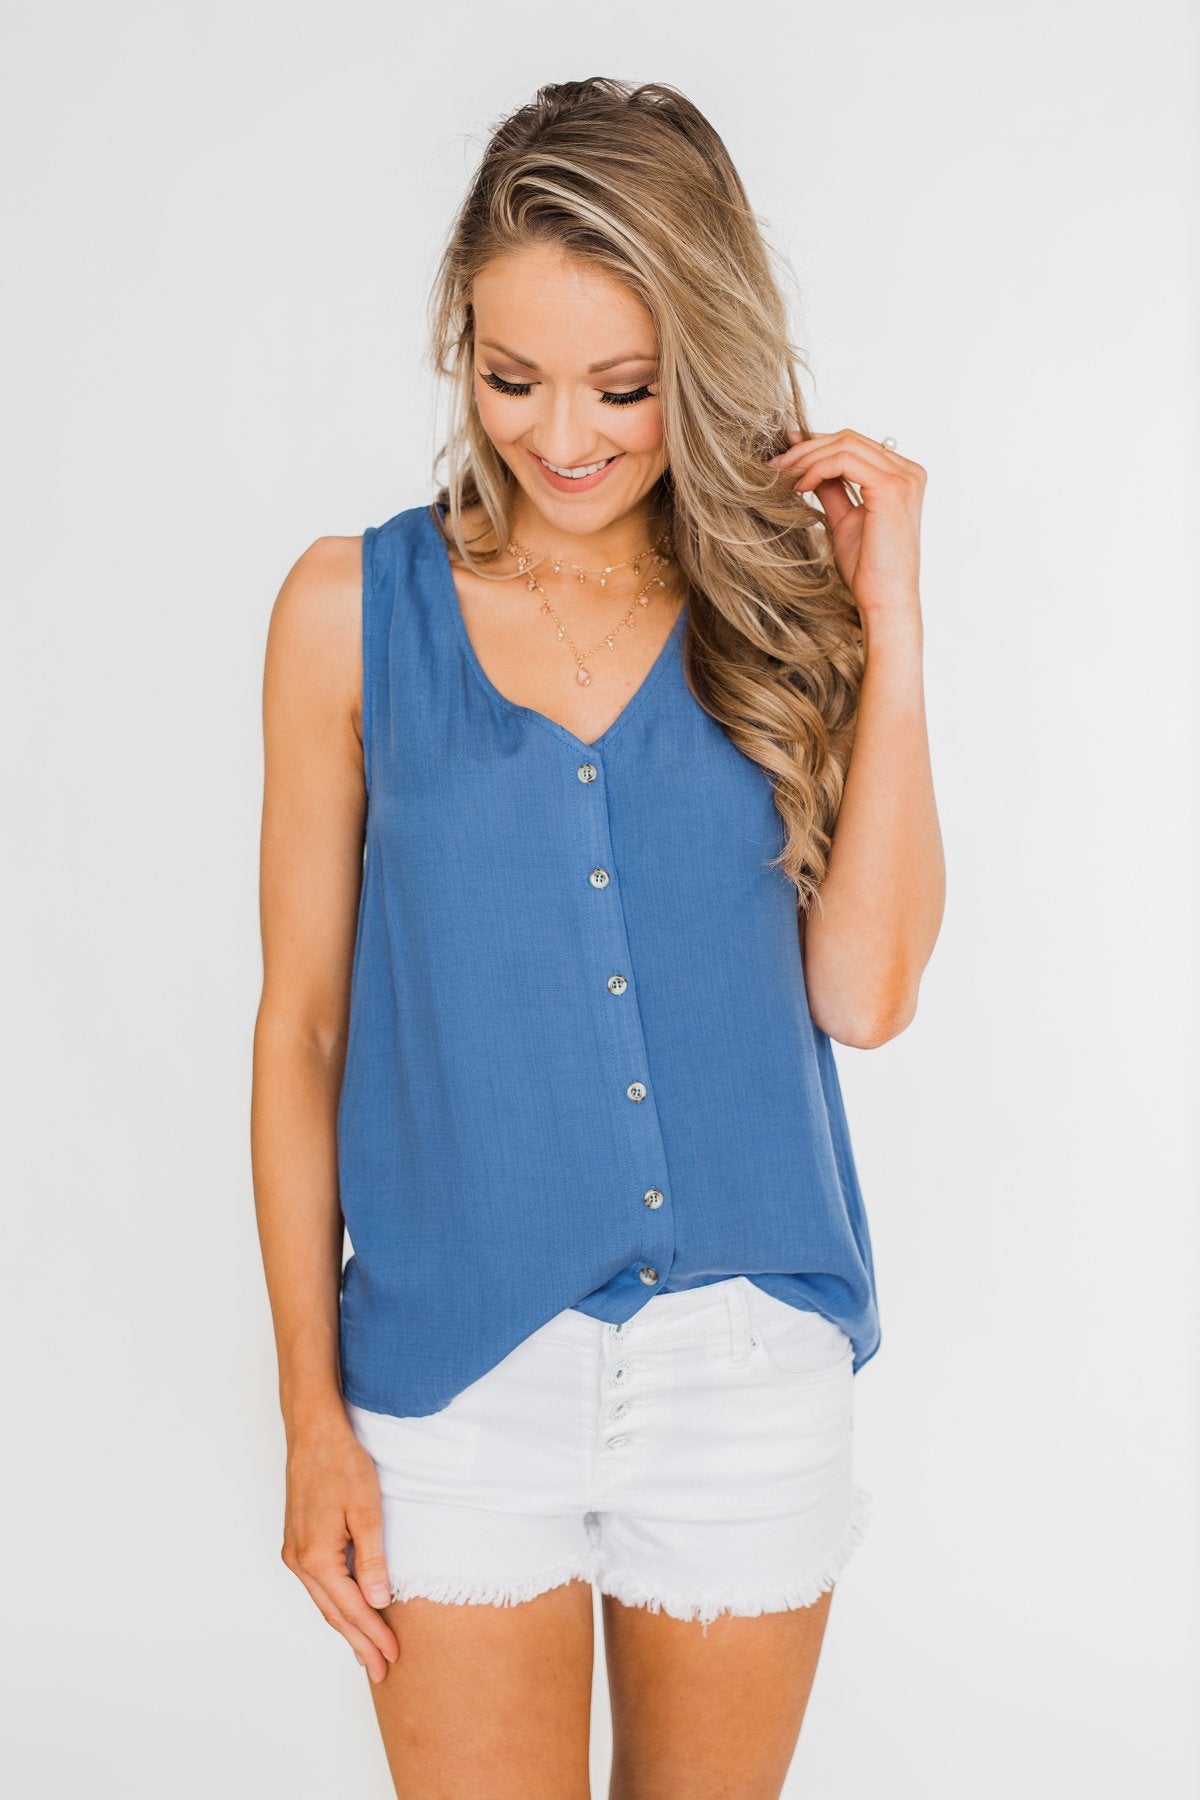 Take It From Me Tie Back Tank Top- Blue